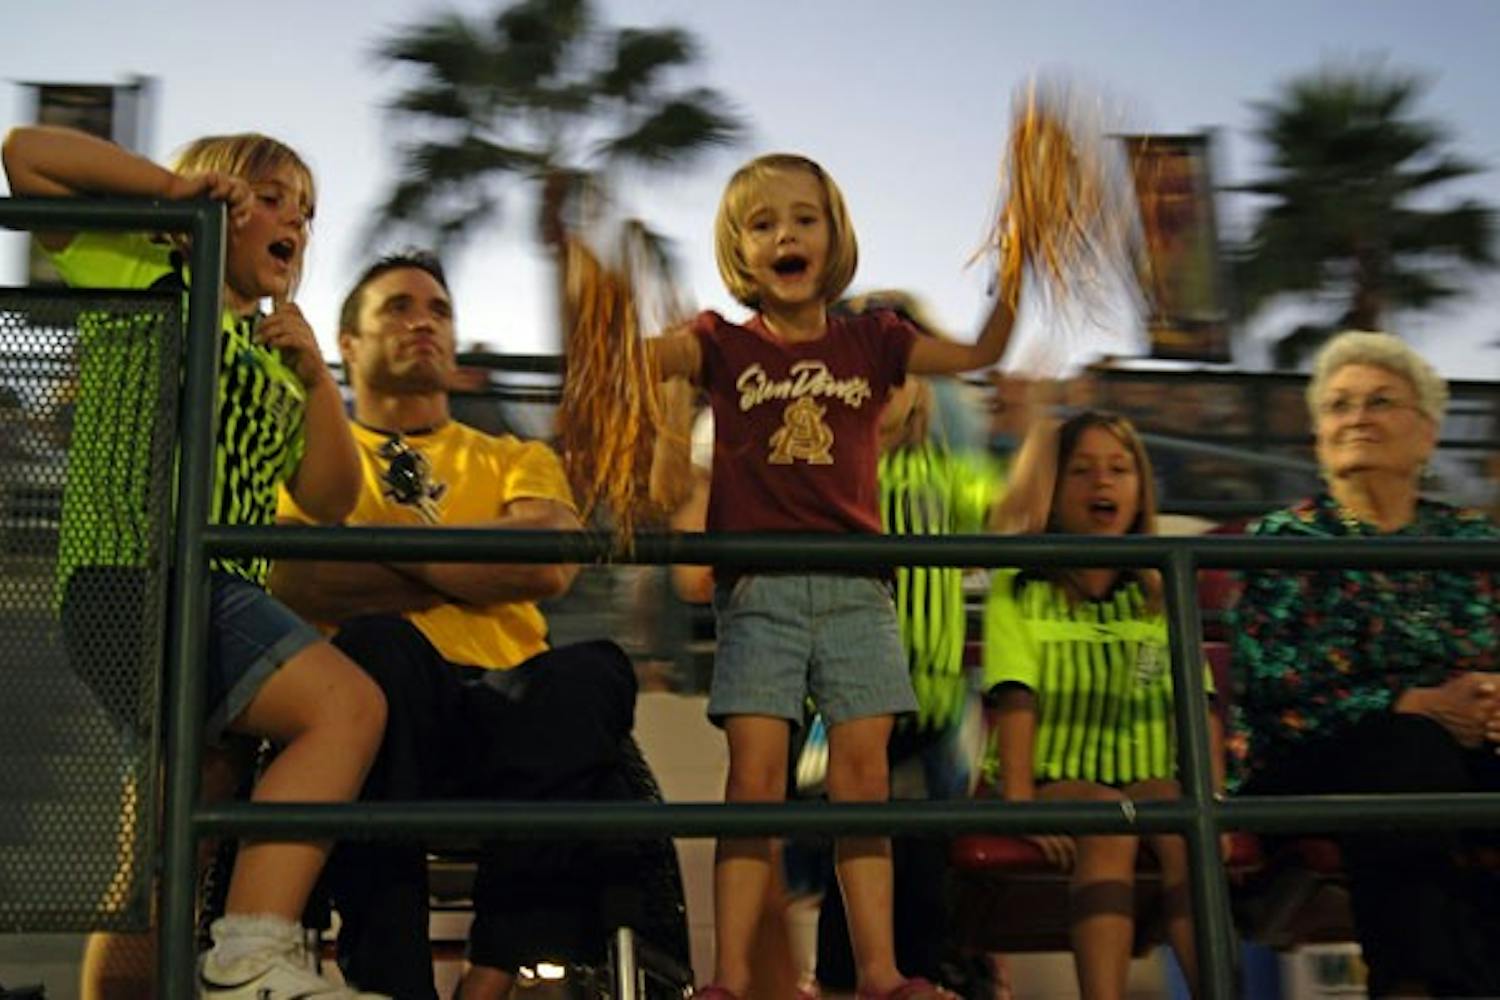 ASU fans cheer after the second winning goal from the Sun Devil women's soccer team on Nov. 2 in Tempe. The women's soccer team, which hosted their final game before playoffs, defeated rival University of Arizona 2-1. (Photo by Julie Vitkovskaya)